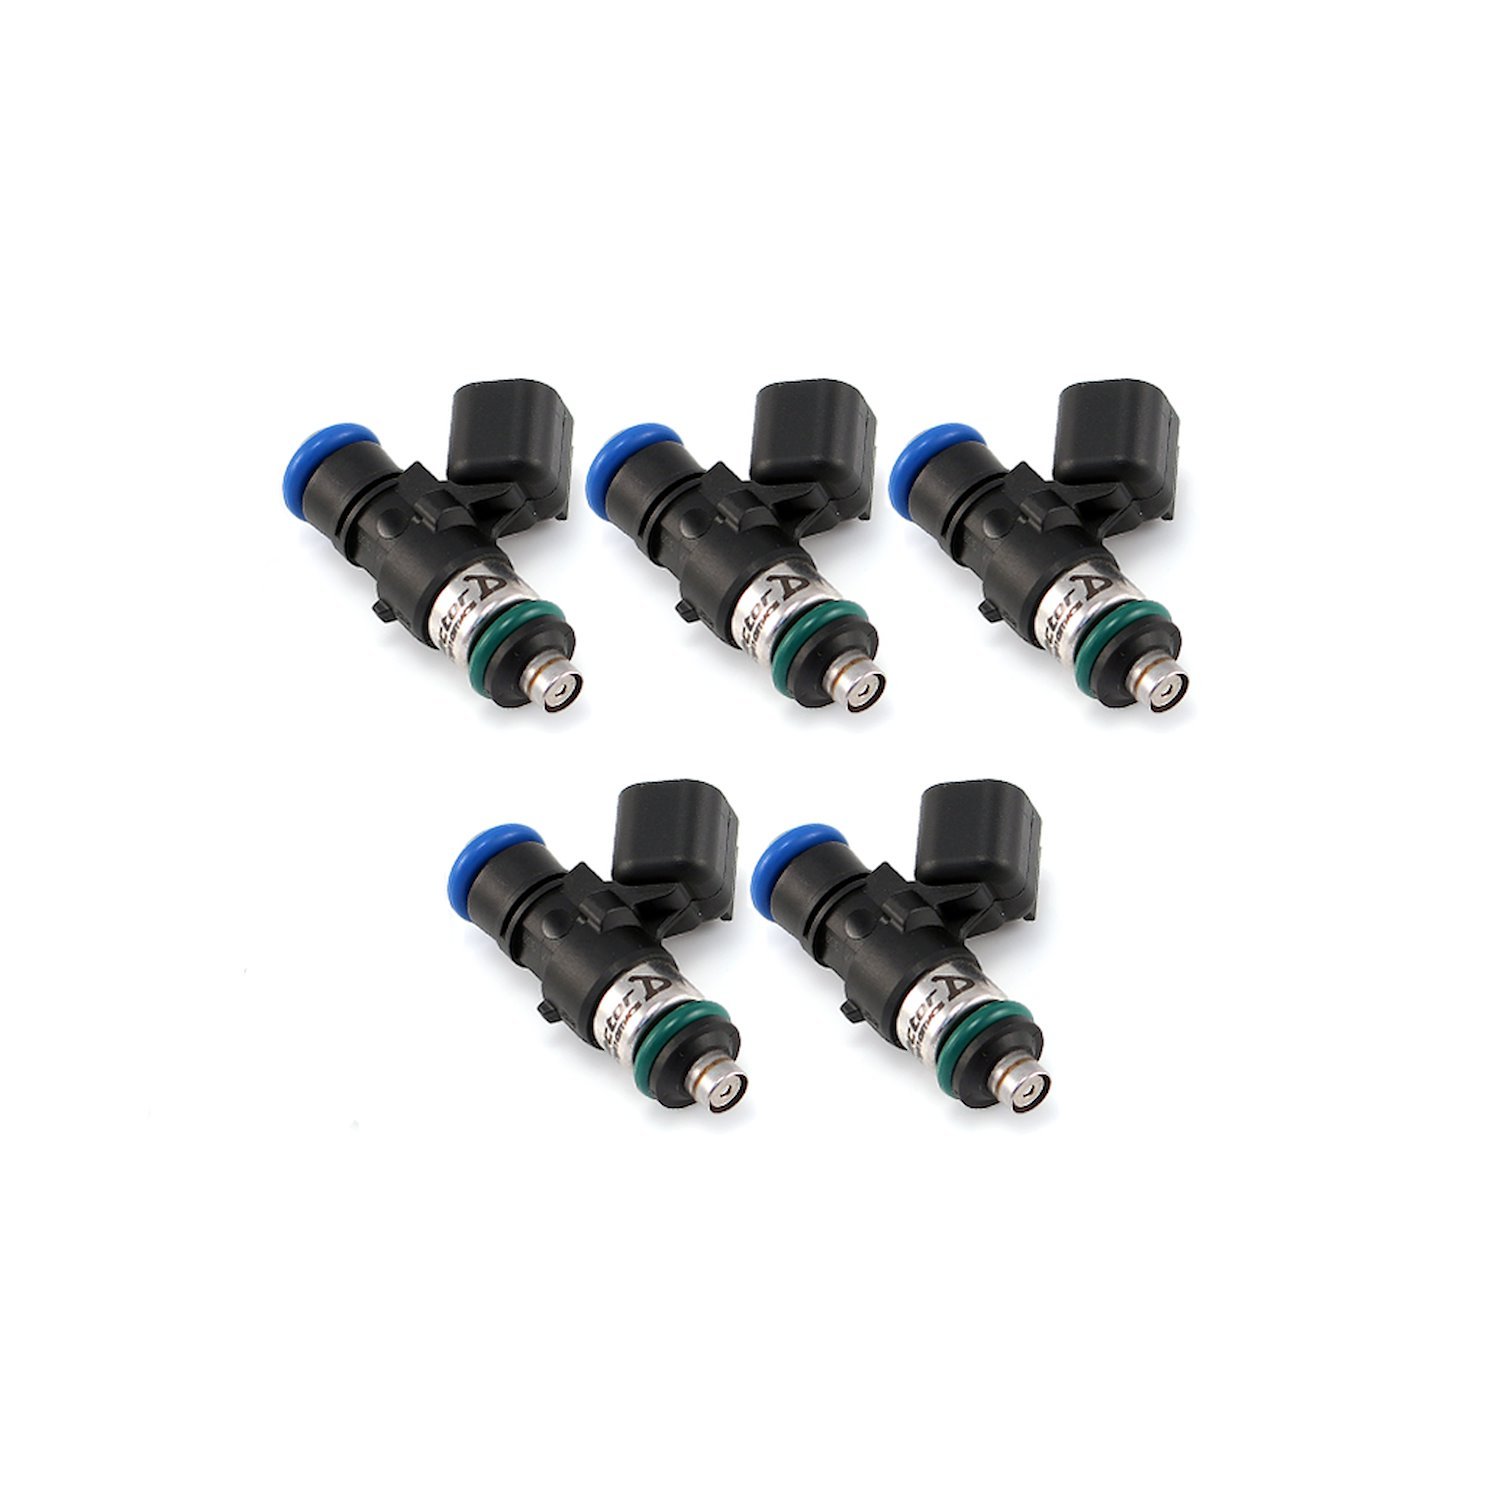 1700.34.14.14.5 1700cc Fuel Injector Set, 34 mm Length (No Adapters), 14 mm Lower O-Ring